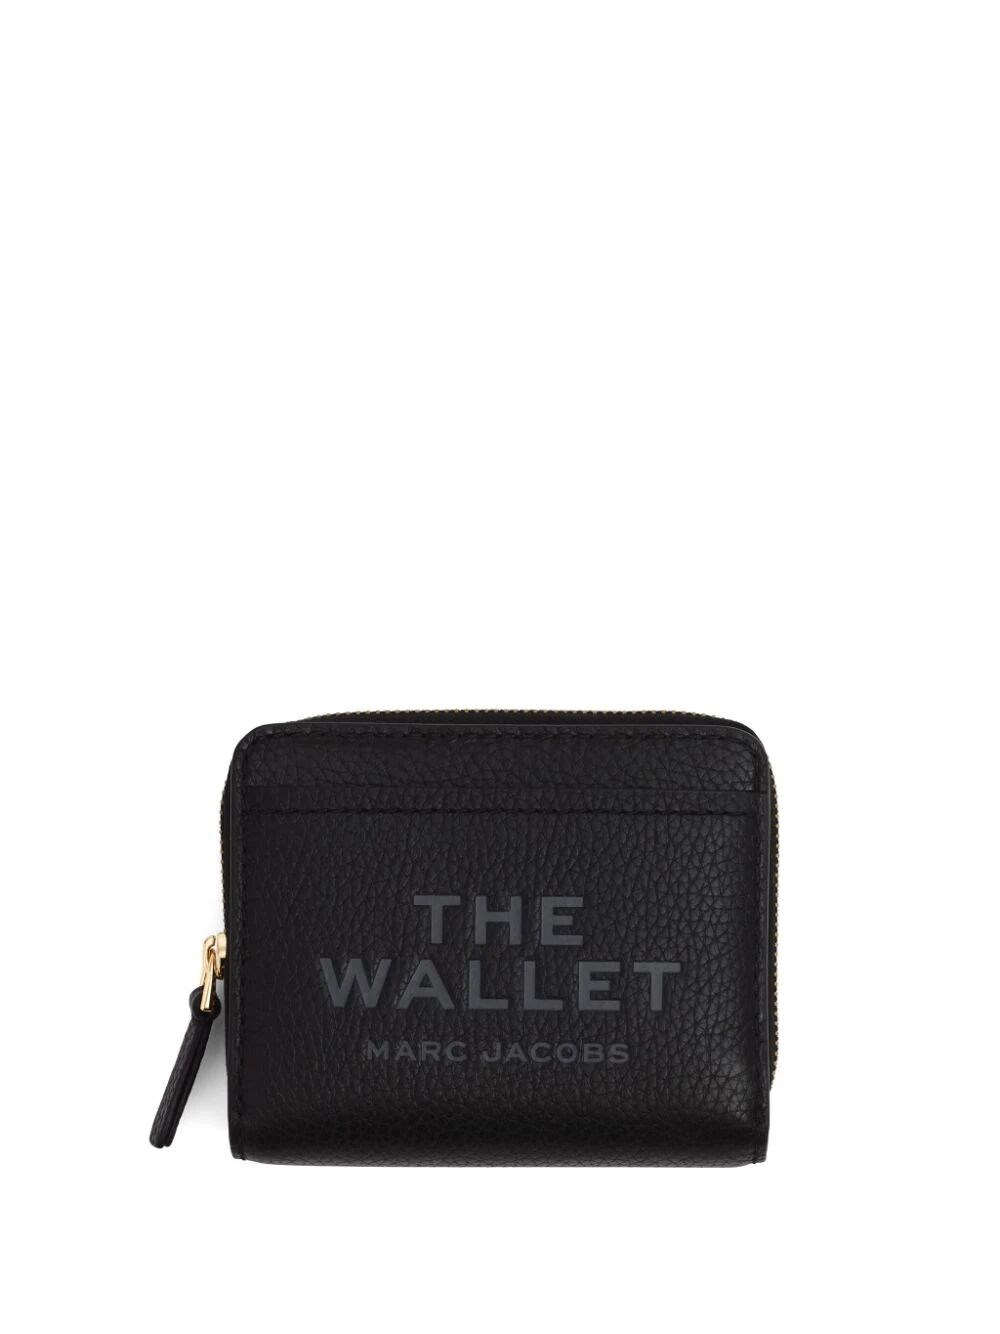 Shop Marc Jacobs The Mini Compact Wallet In Black